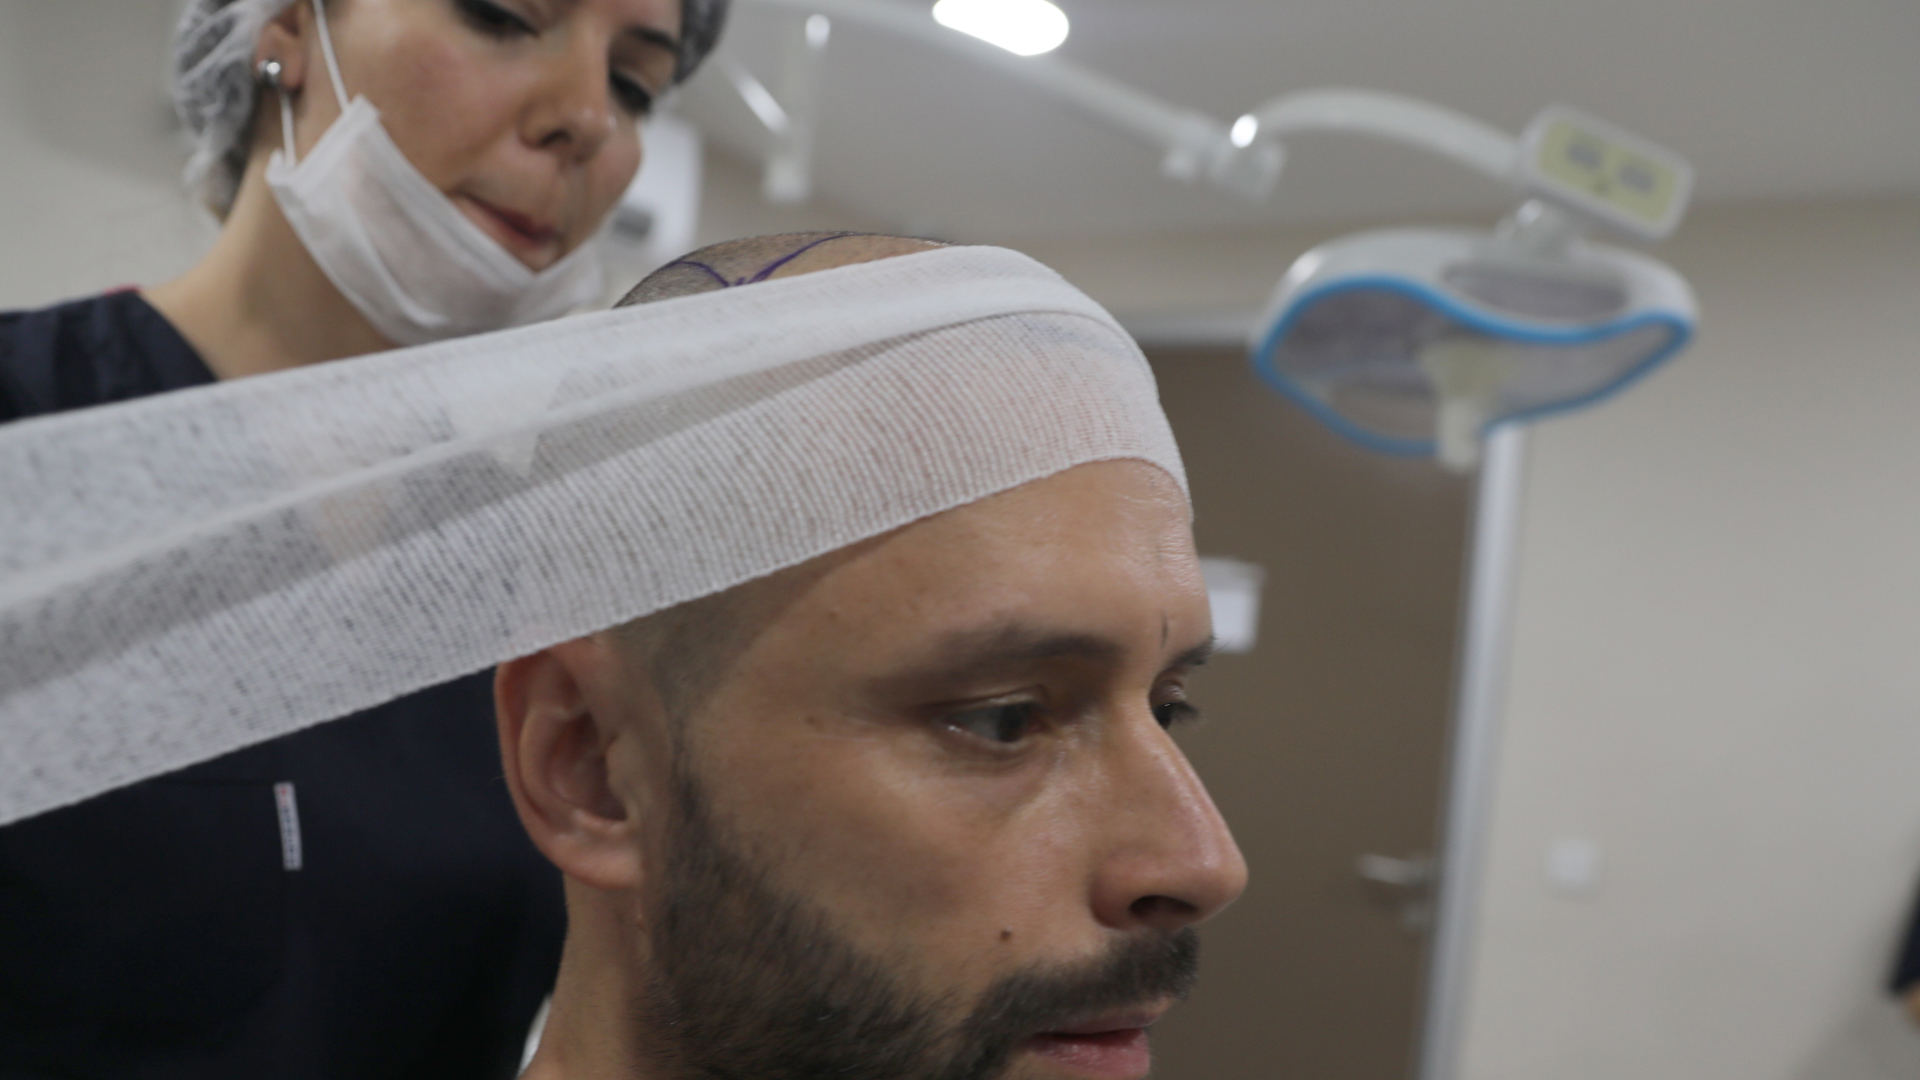 Failed hair transplant: how to avoid it and how to correct it?